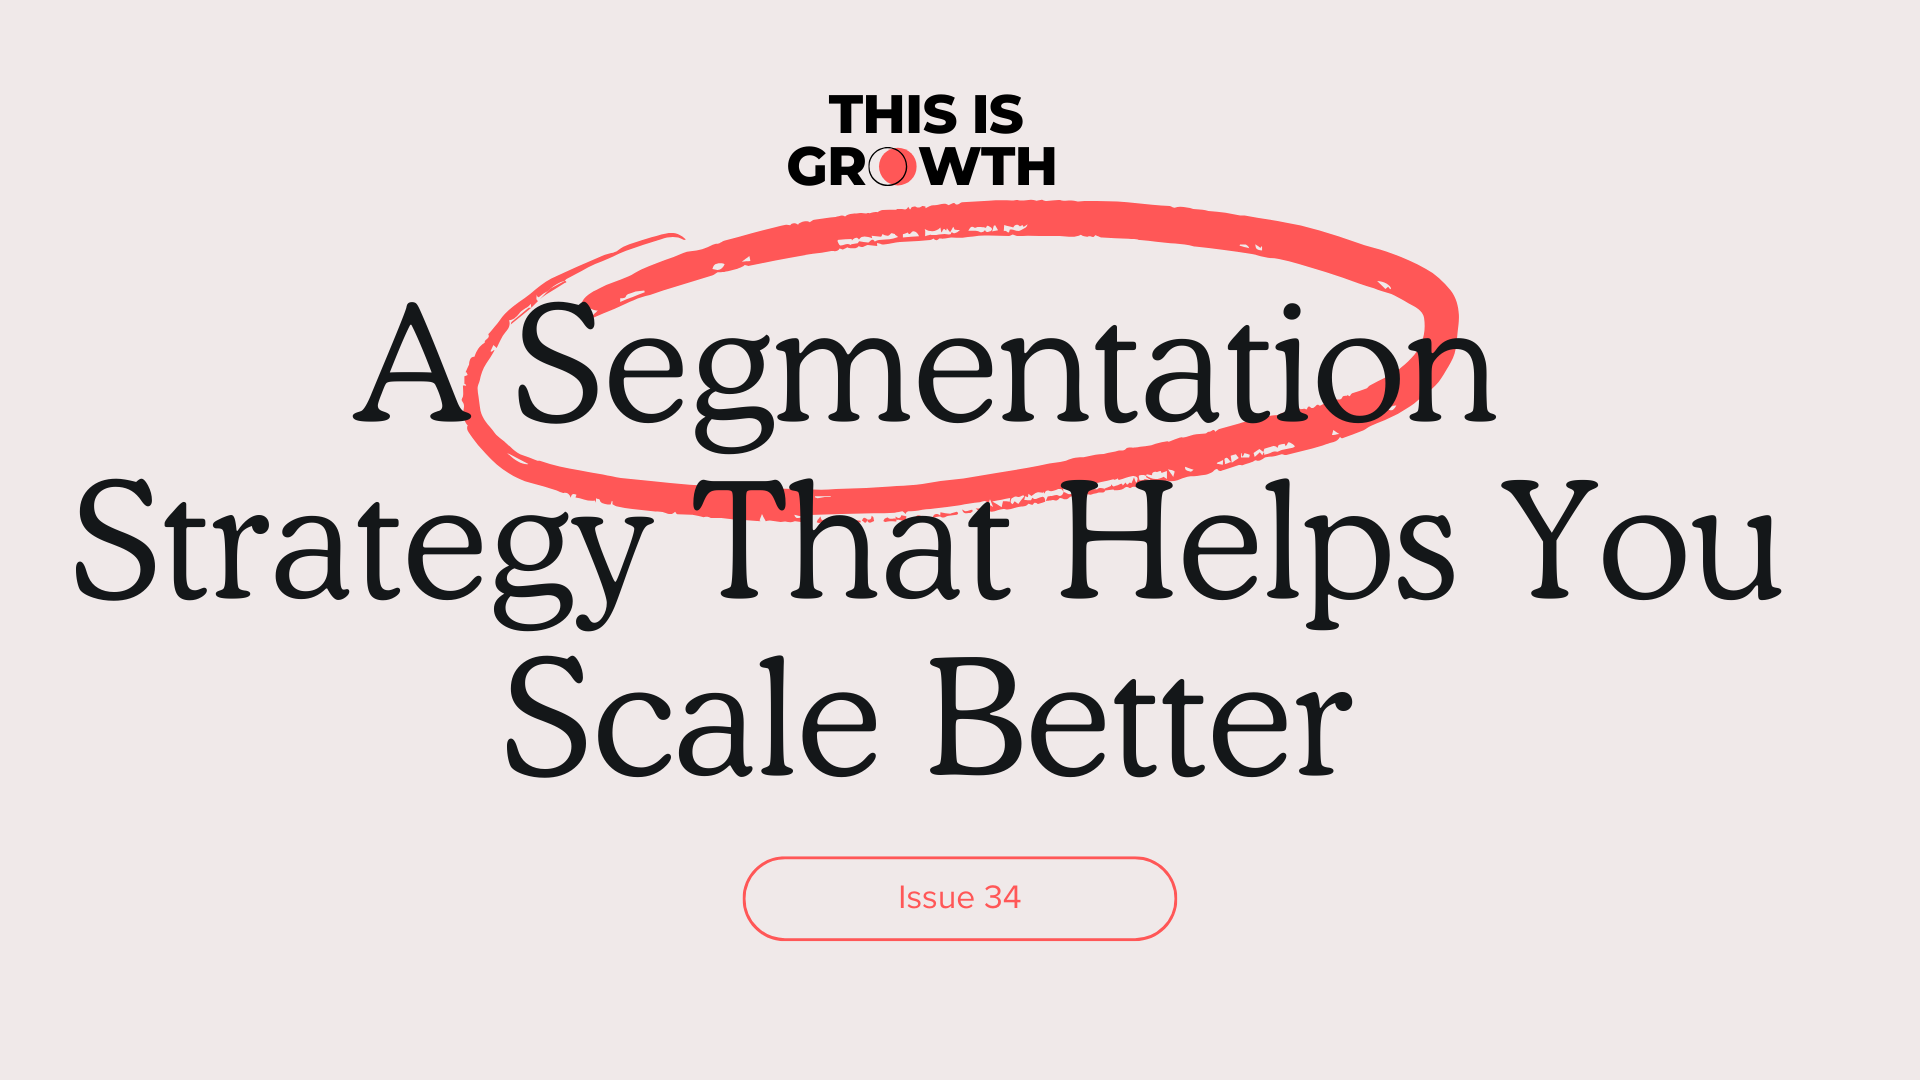 A Customer Segmentation Strategy That Helps You Scale Better